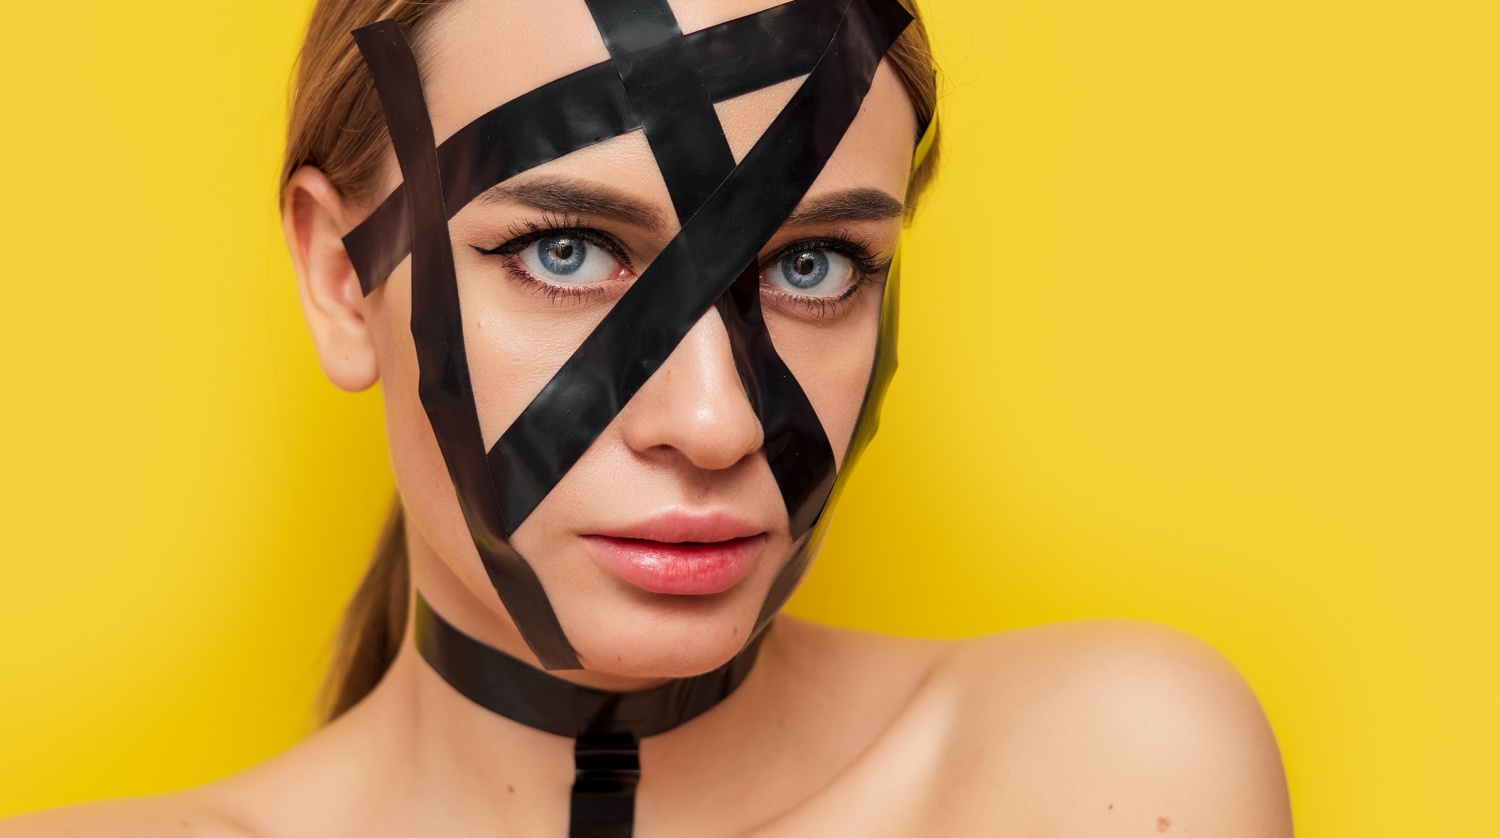 Does the TikTok trend of face taping to stop wrinkles work? A